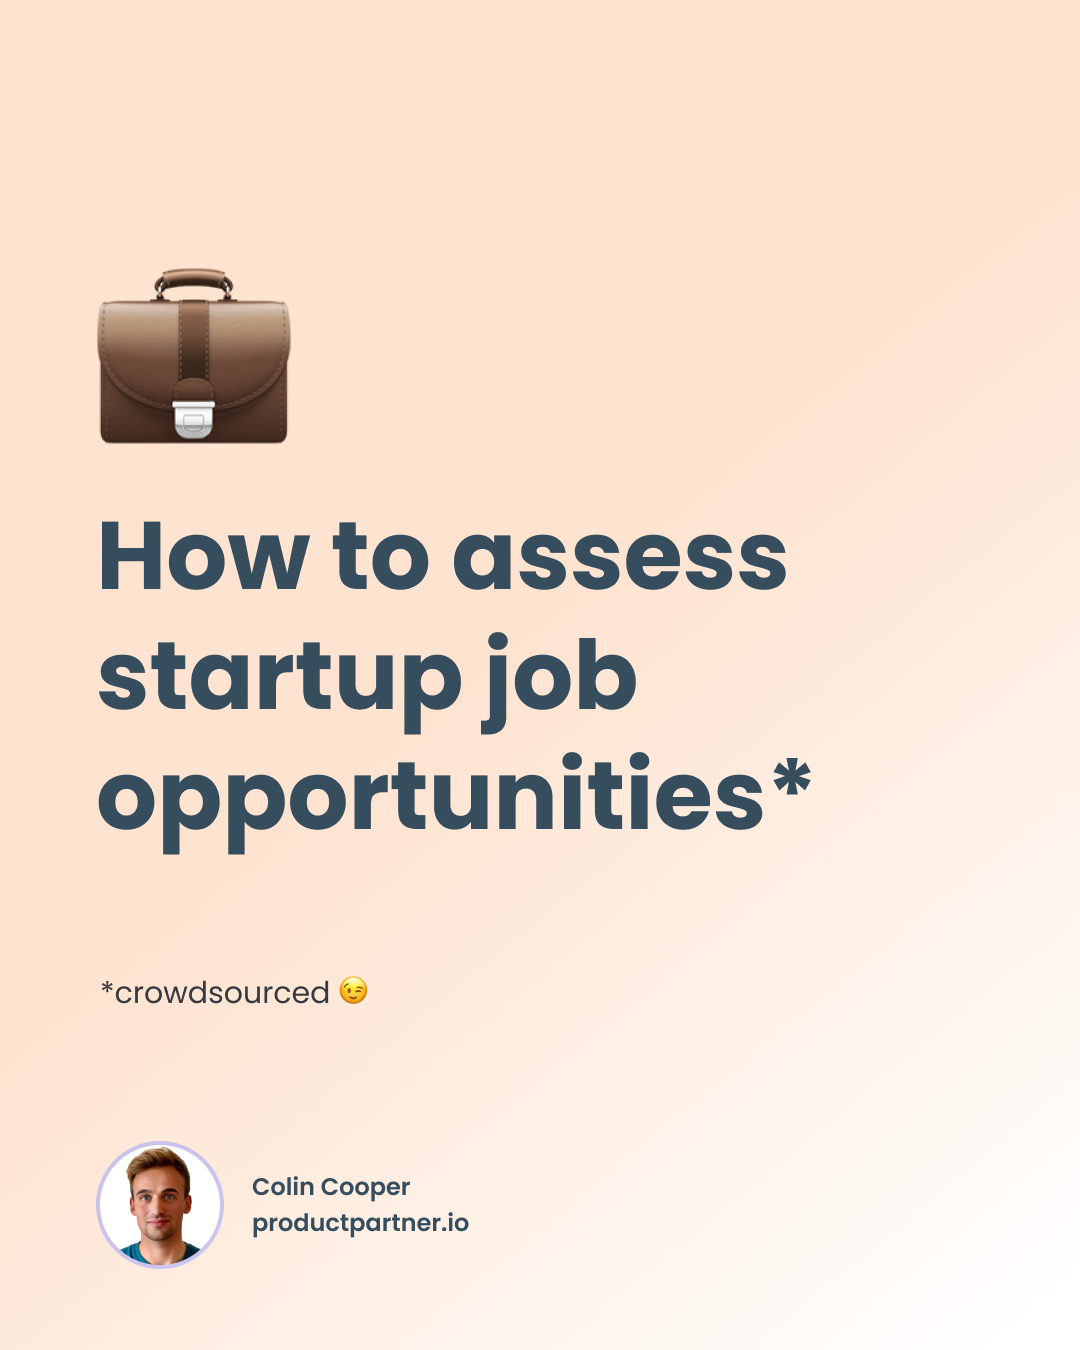 How to assess startup job opportunities